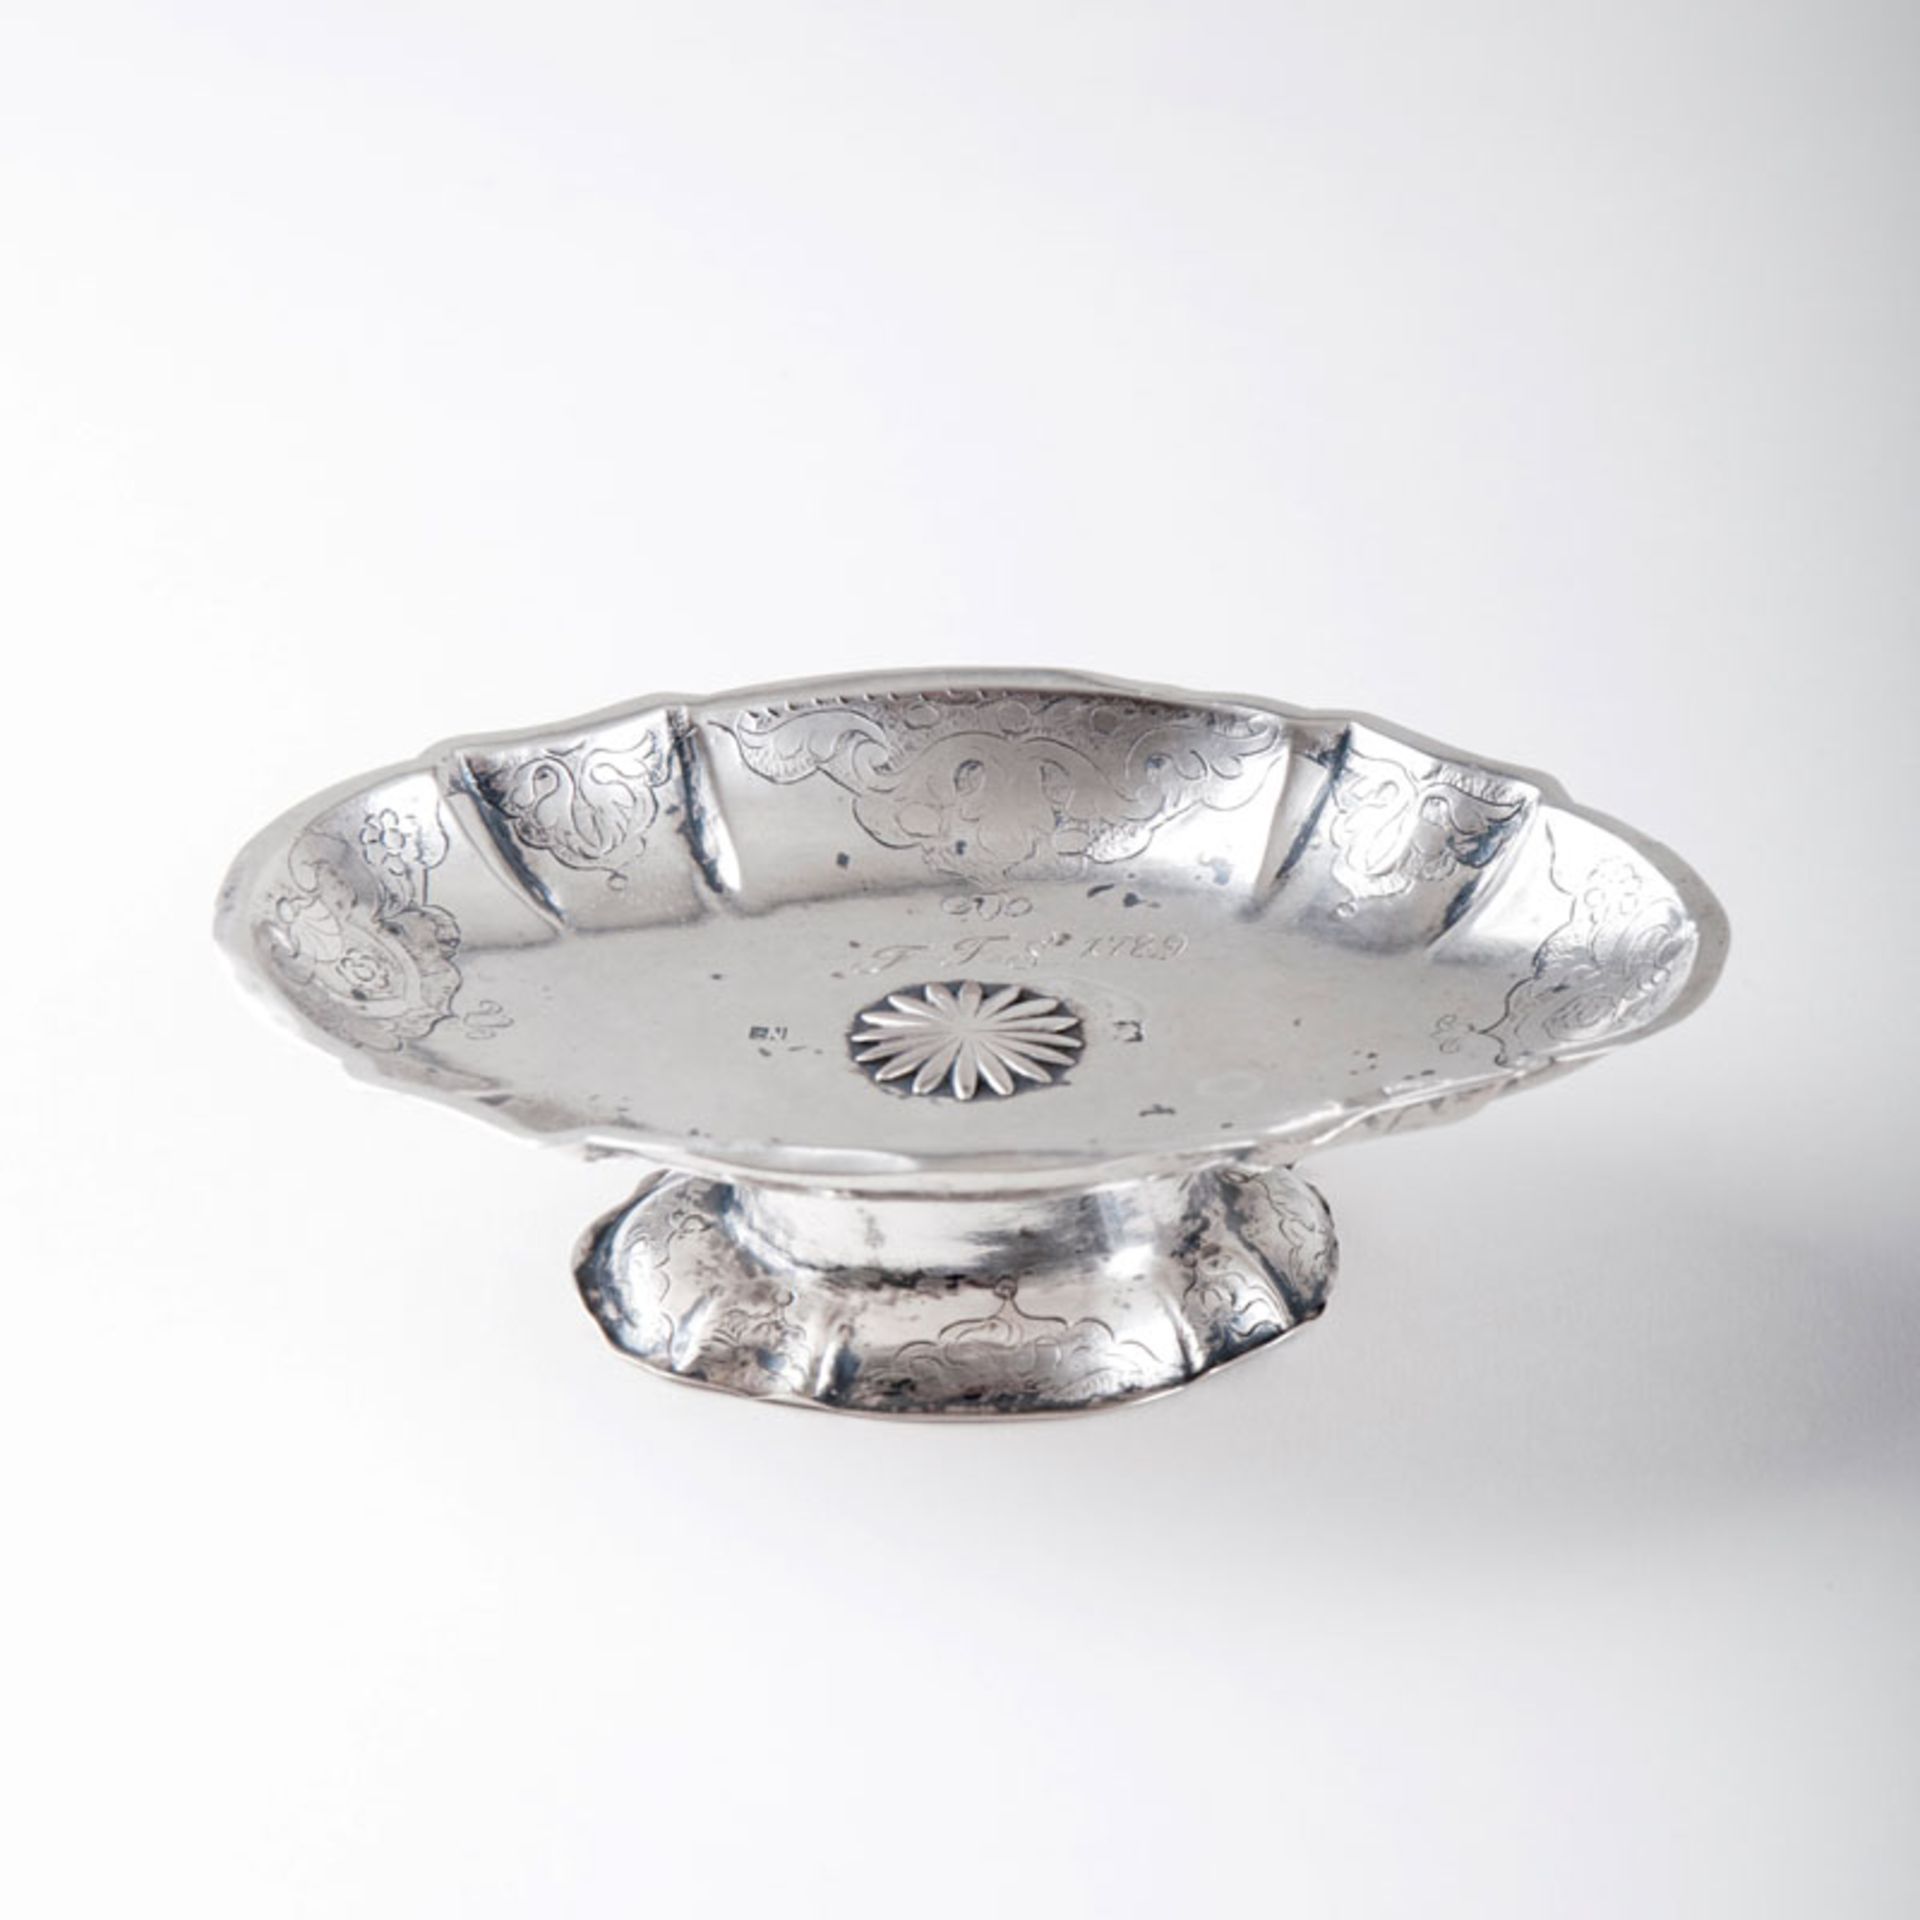 A fine Rococo bowl with engraved pattern Danish, 2nd half of 18th cent. Silver, stamped, assay